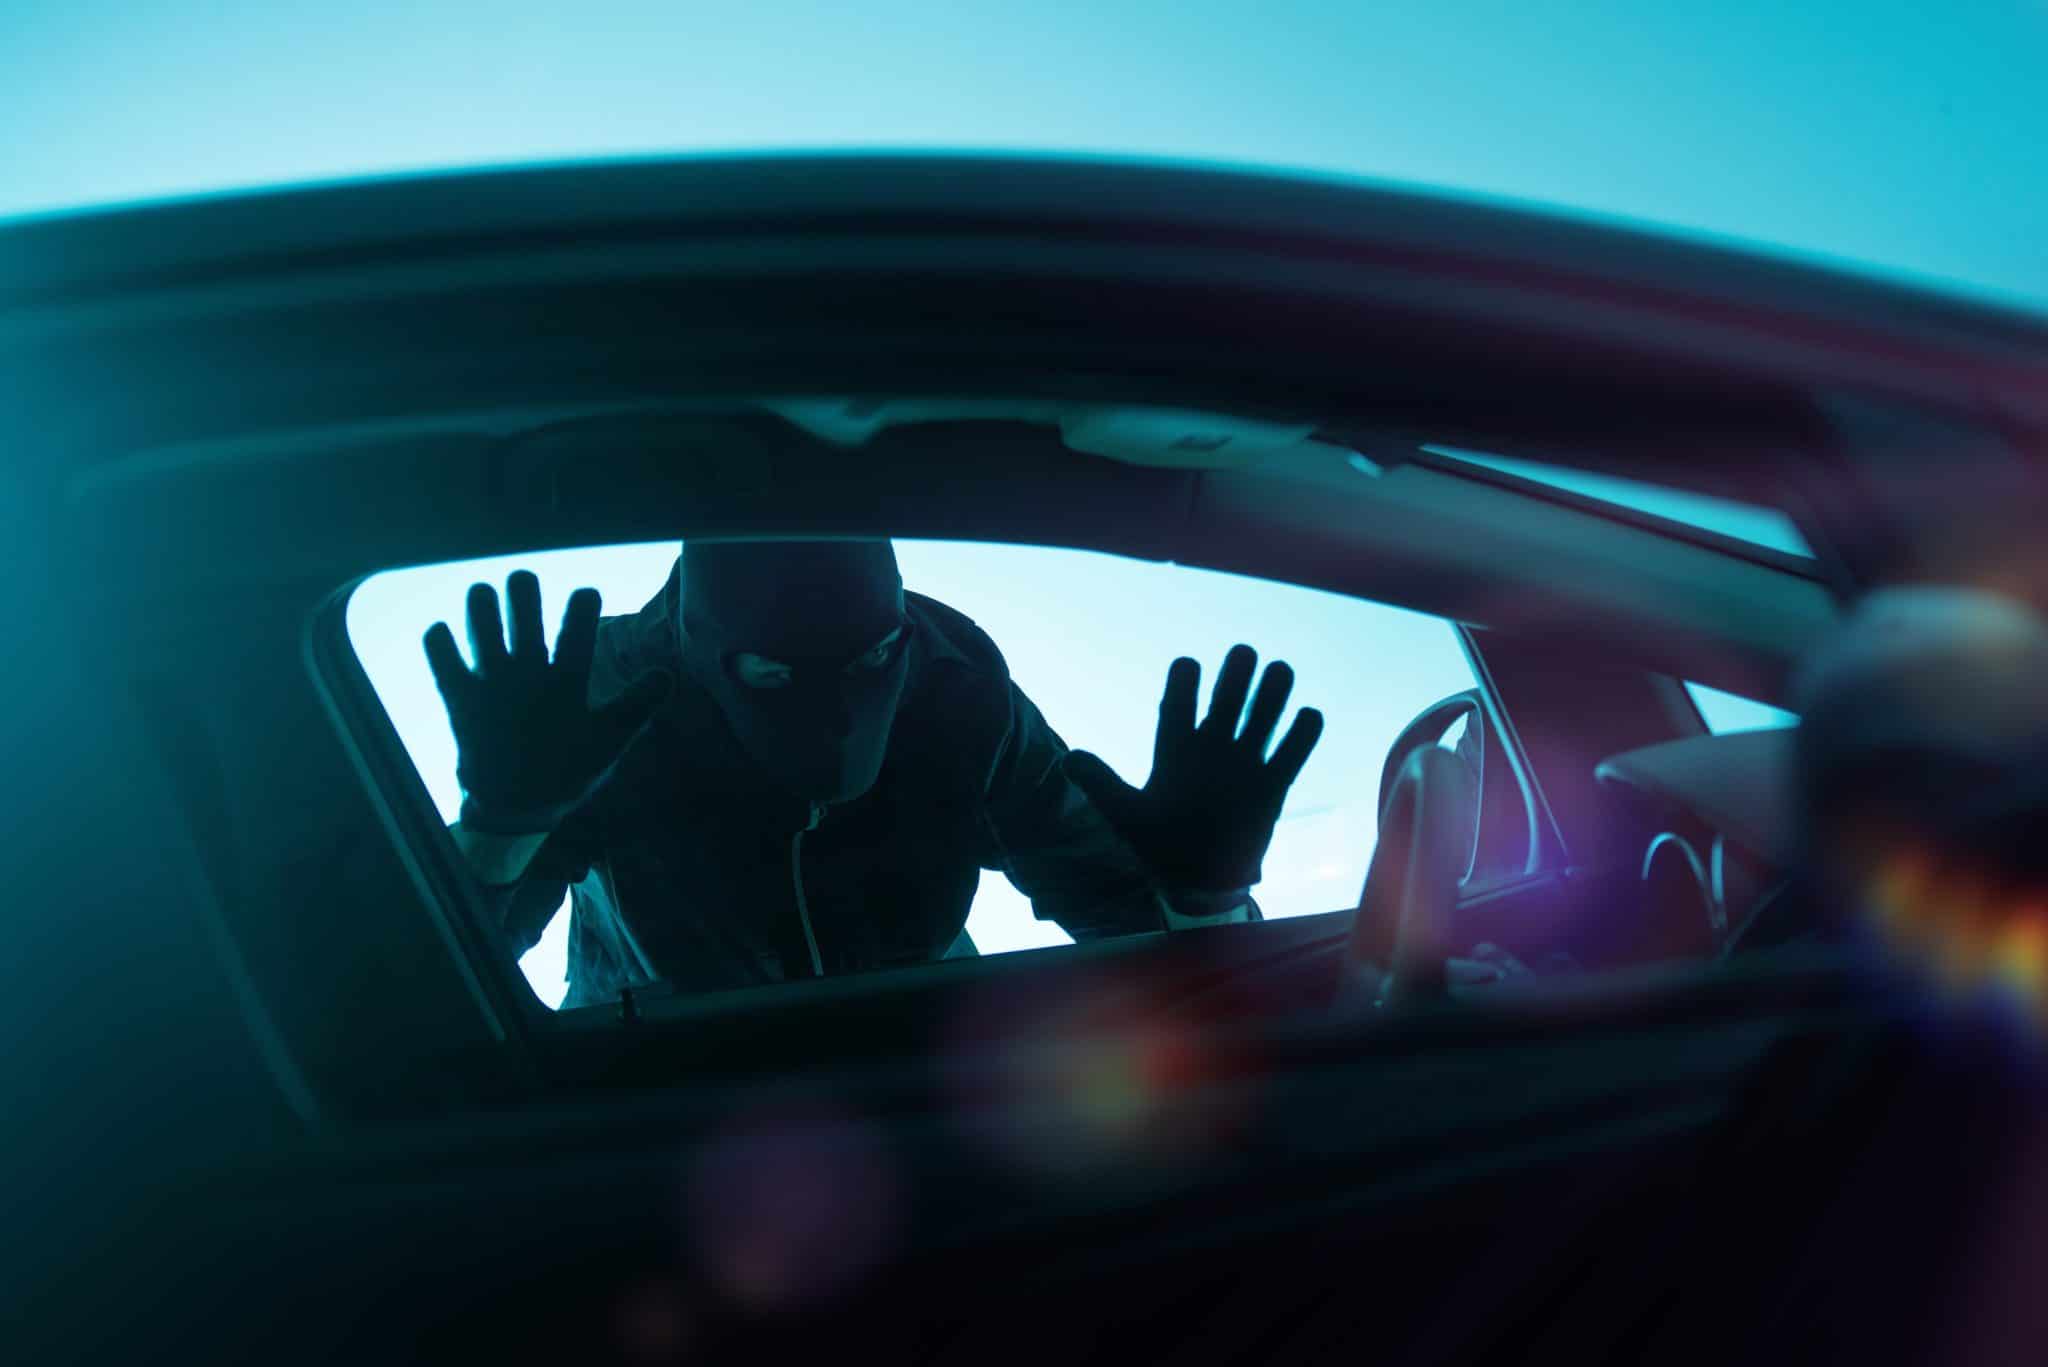 How Two Different Businesses Benefited from our Auto Theft Solution